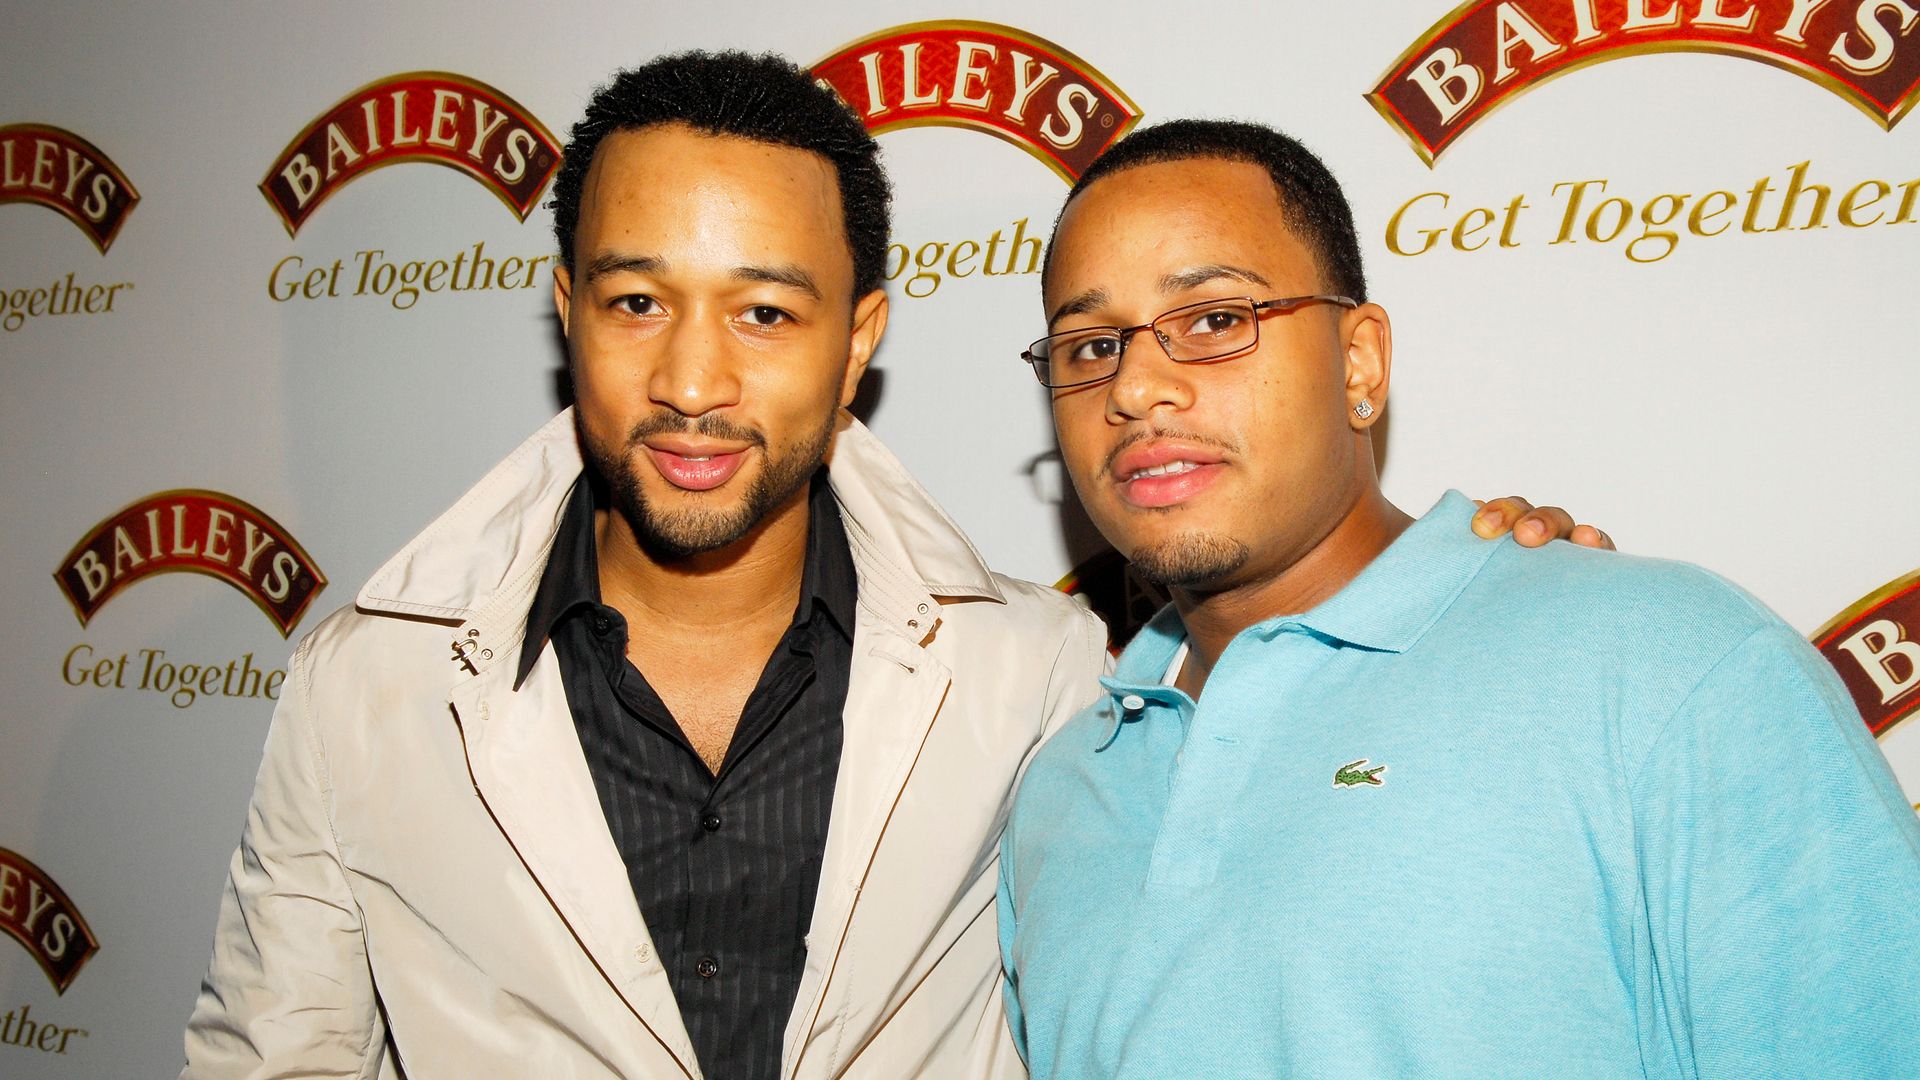 John Legend with his brother Vaughn Anthony